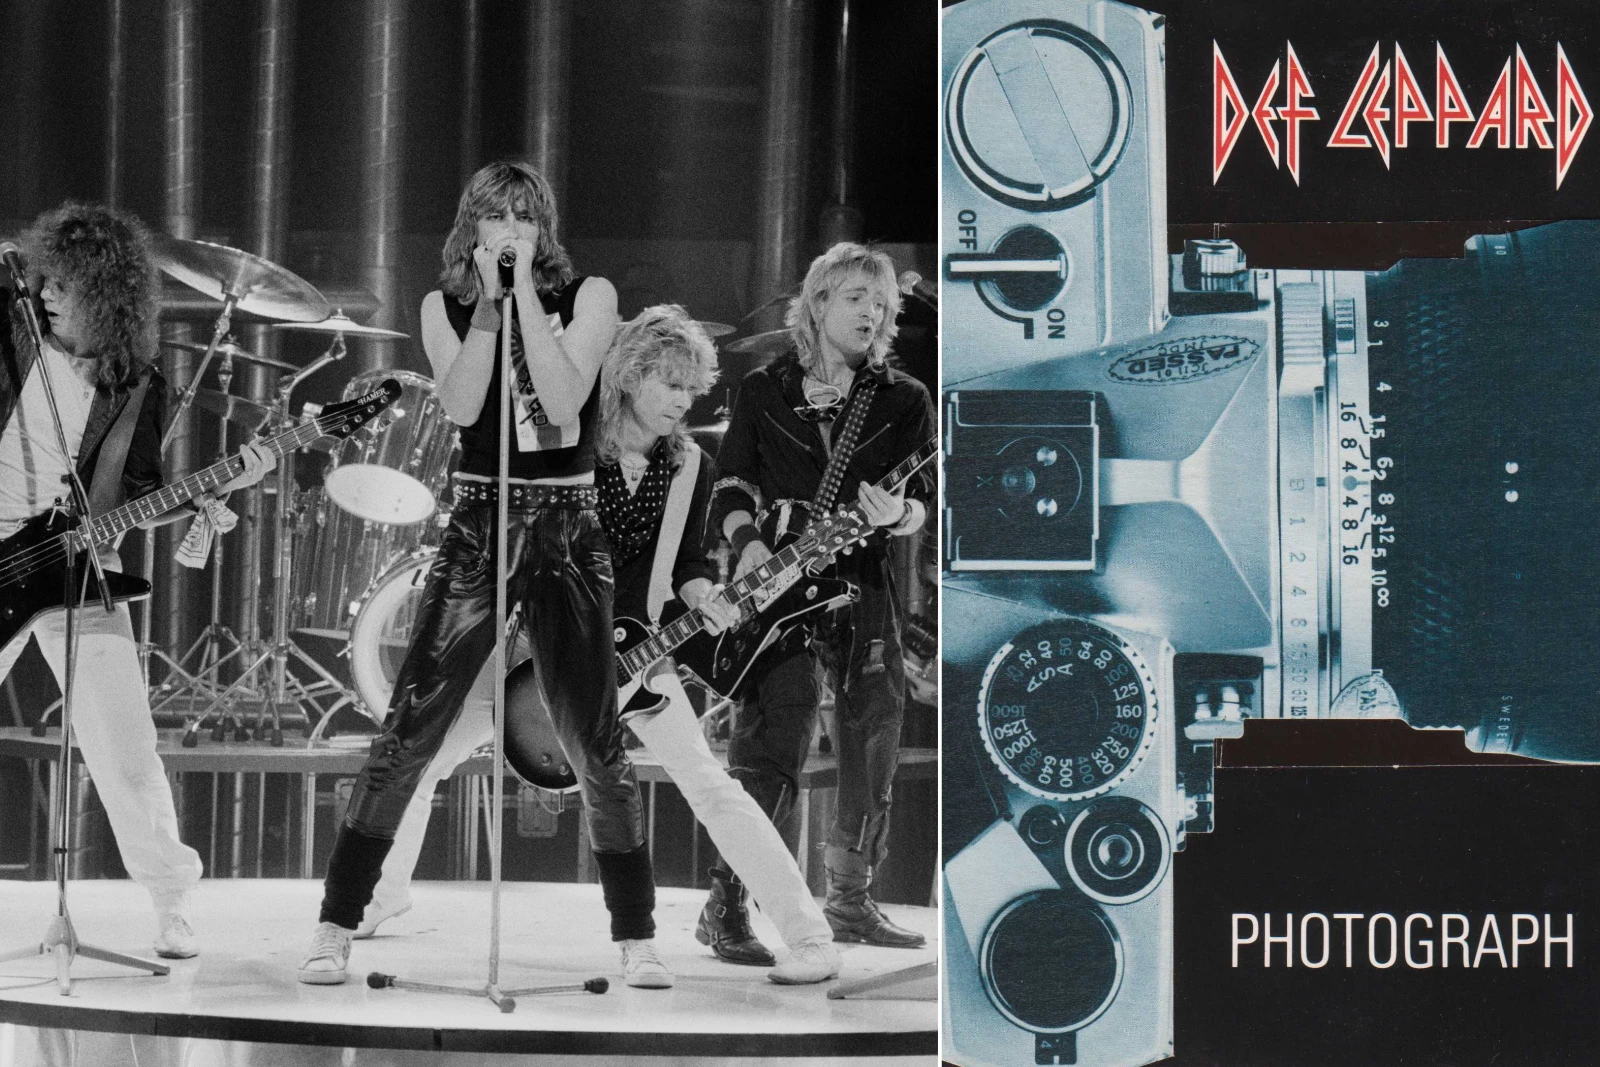 How ‘Photograph’ Sent Def Leppard Into the Stratosphere